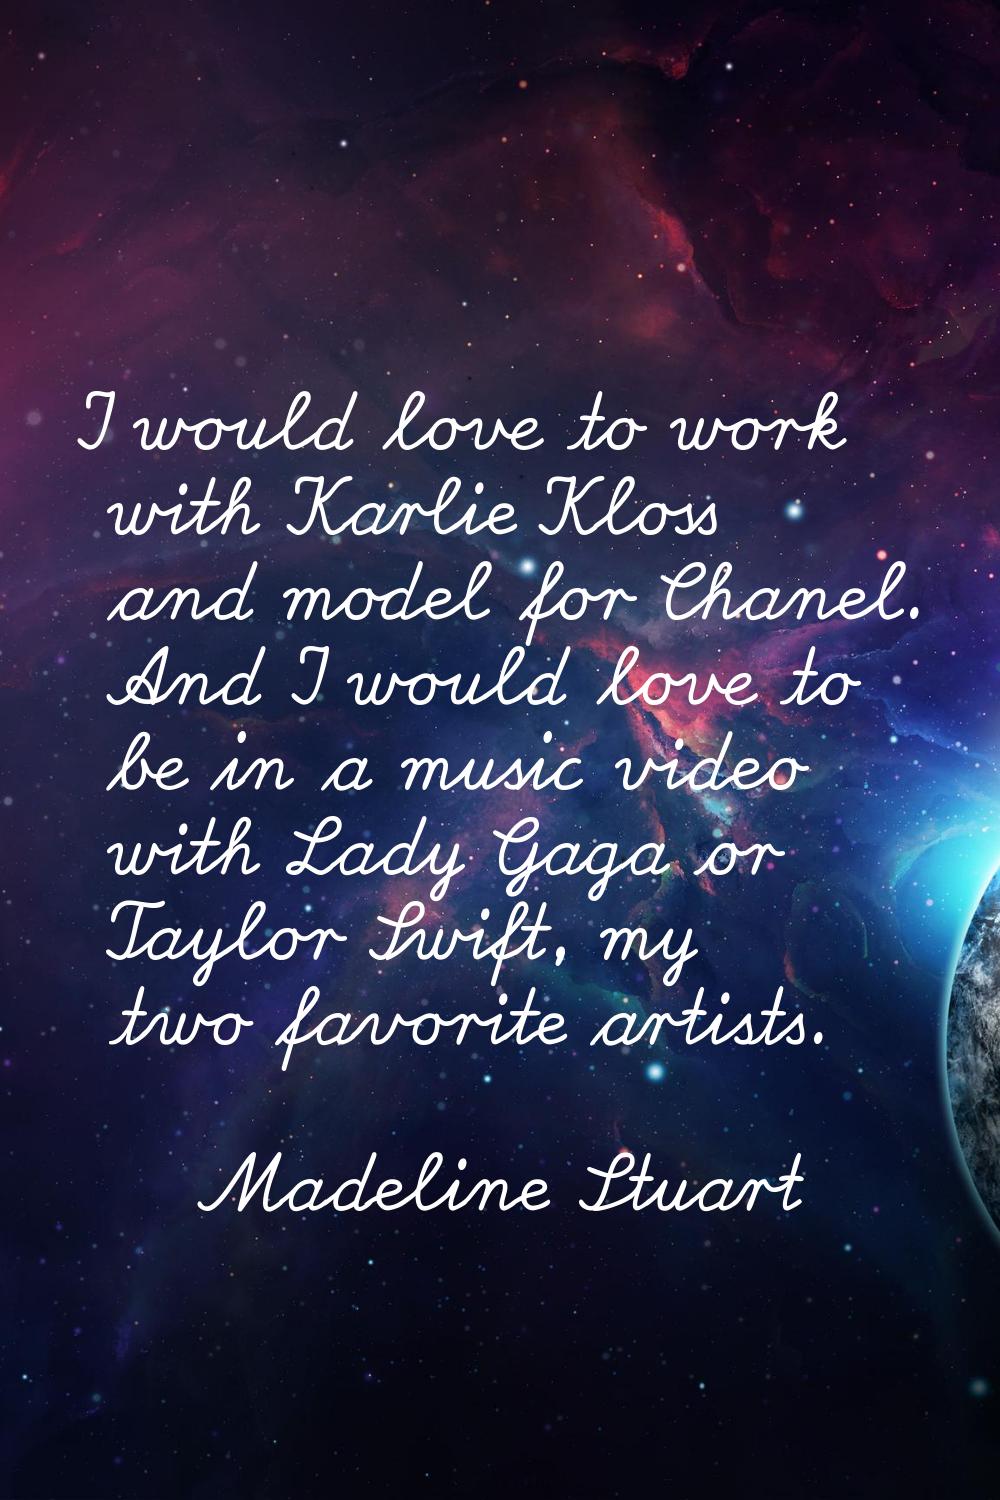 I would love to work with Karlie Kloss and model for Chanel. And I would love to be in a music vide